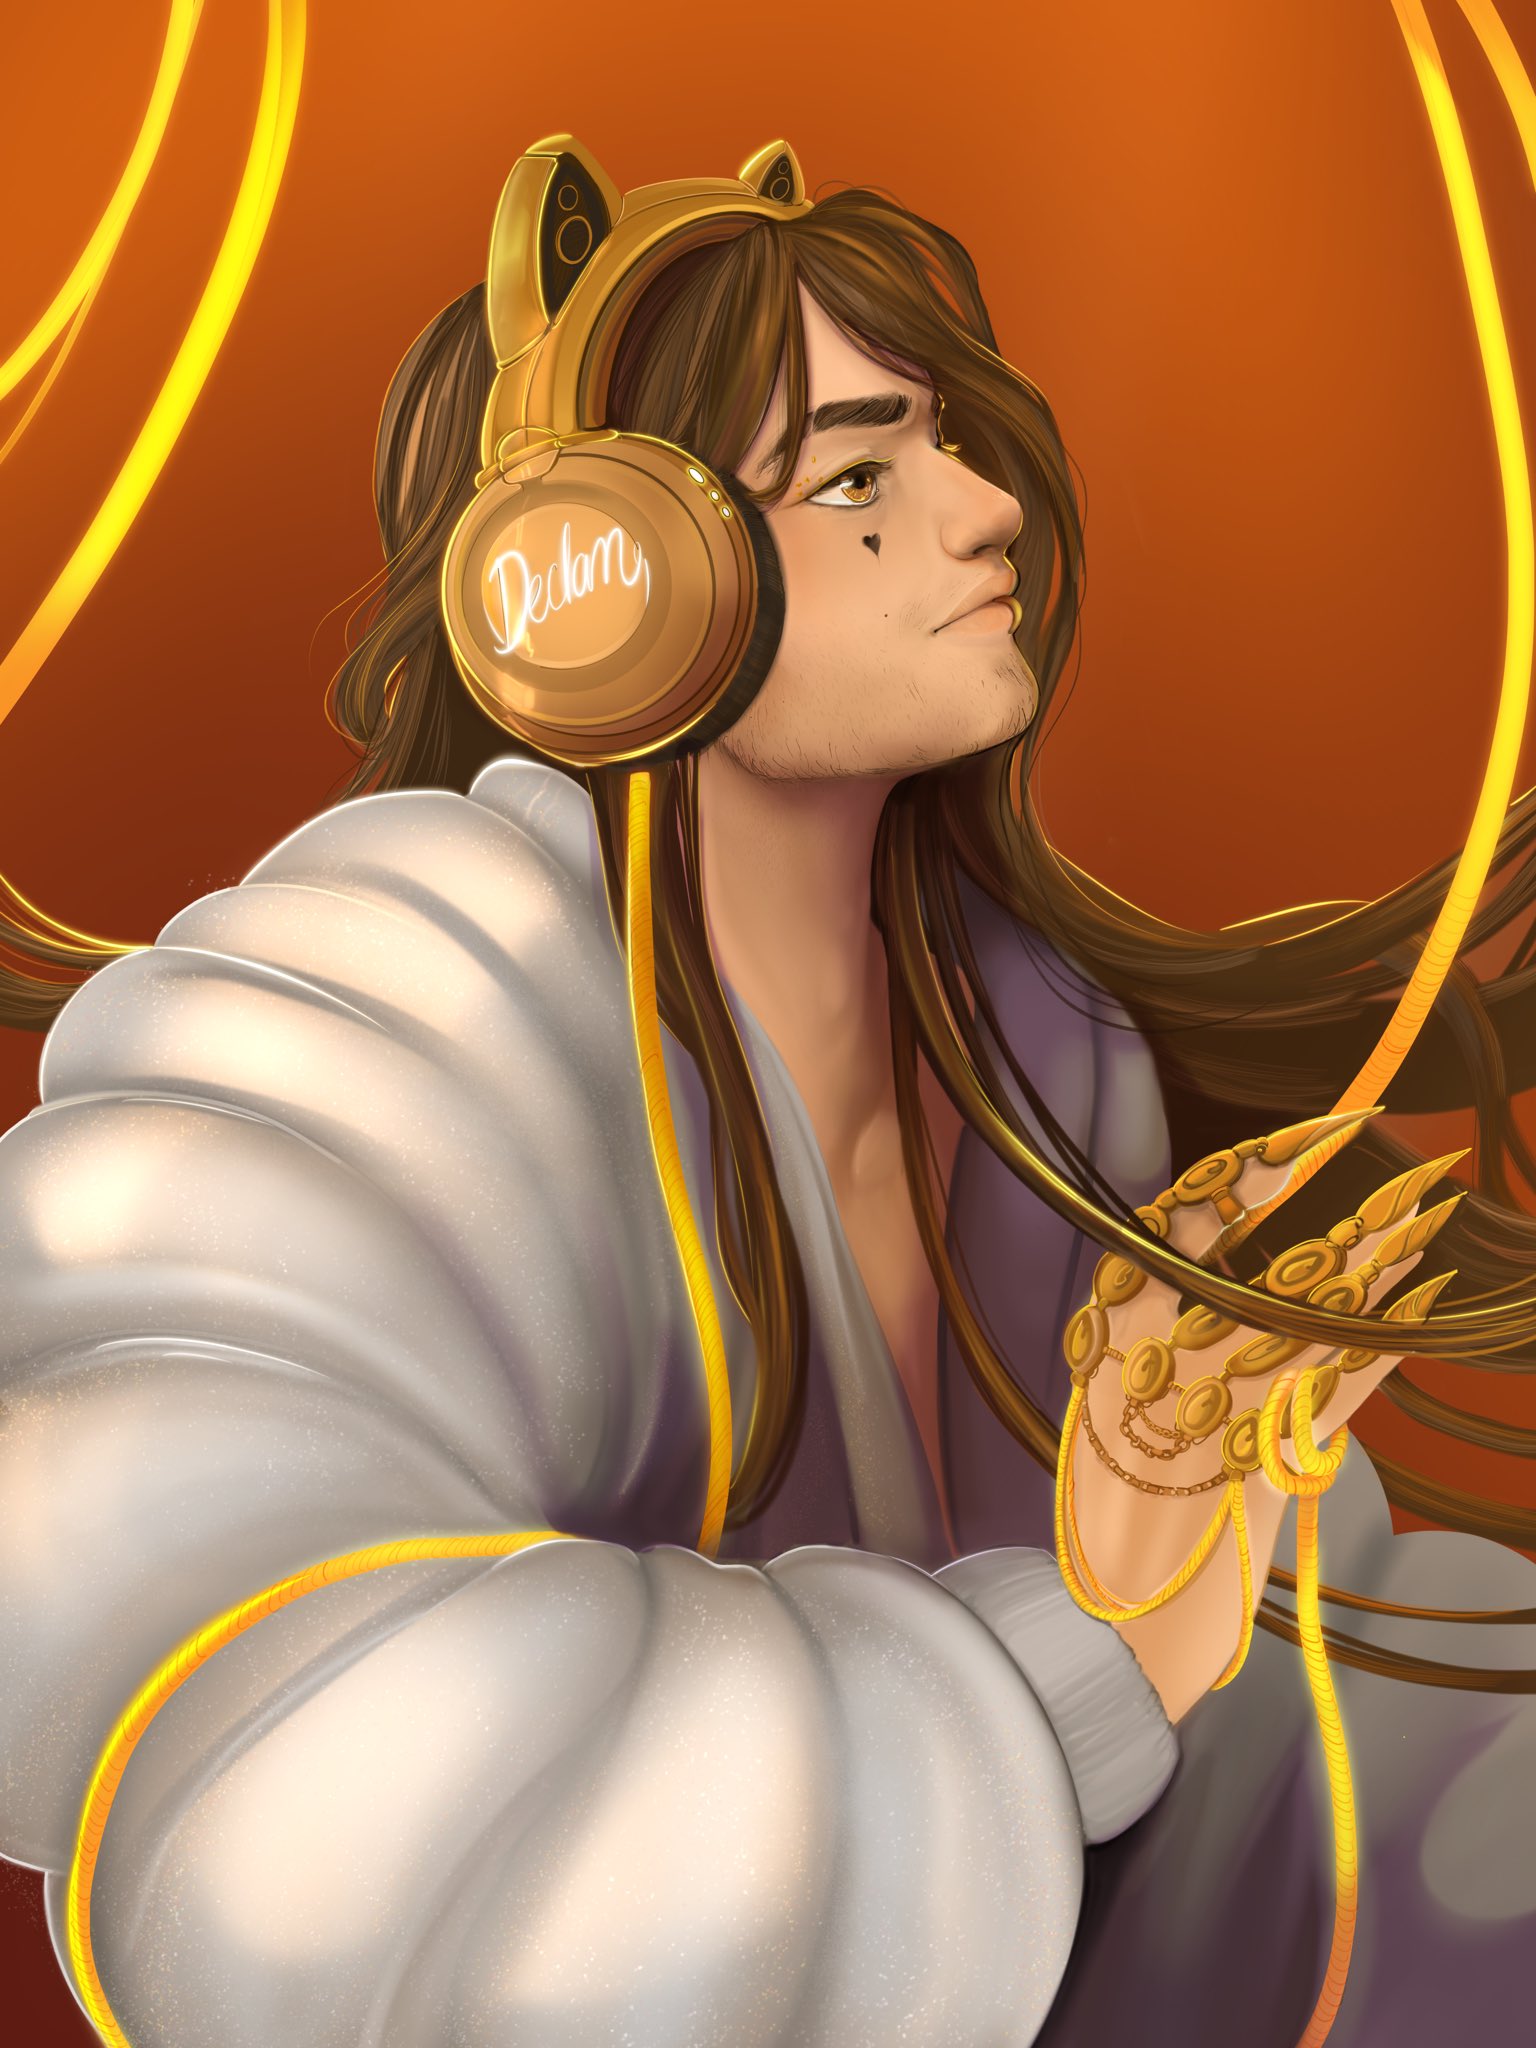 Fan art of Declan Suzanne. He has long brown hair, a puffy white jacket and gold cat ear headphones